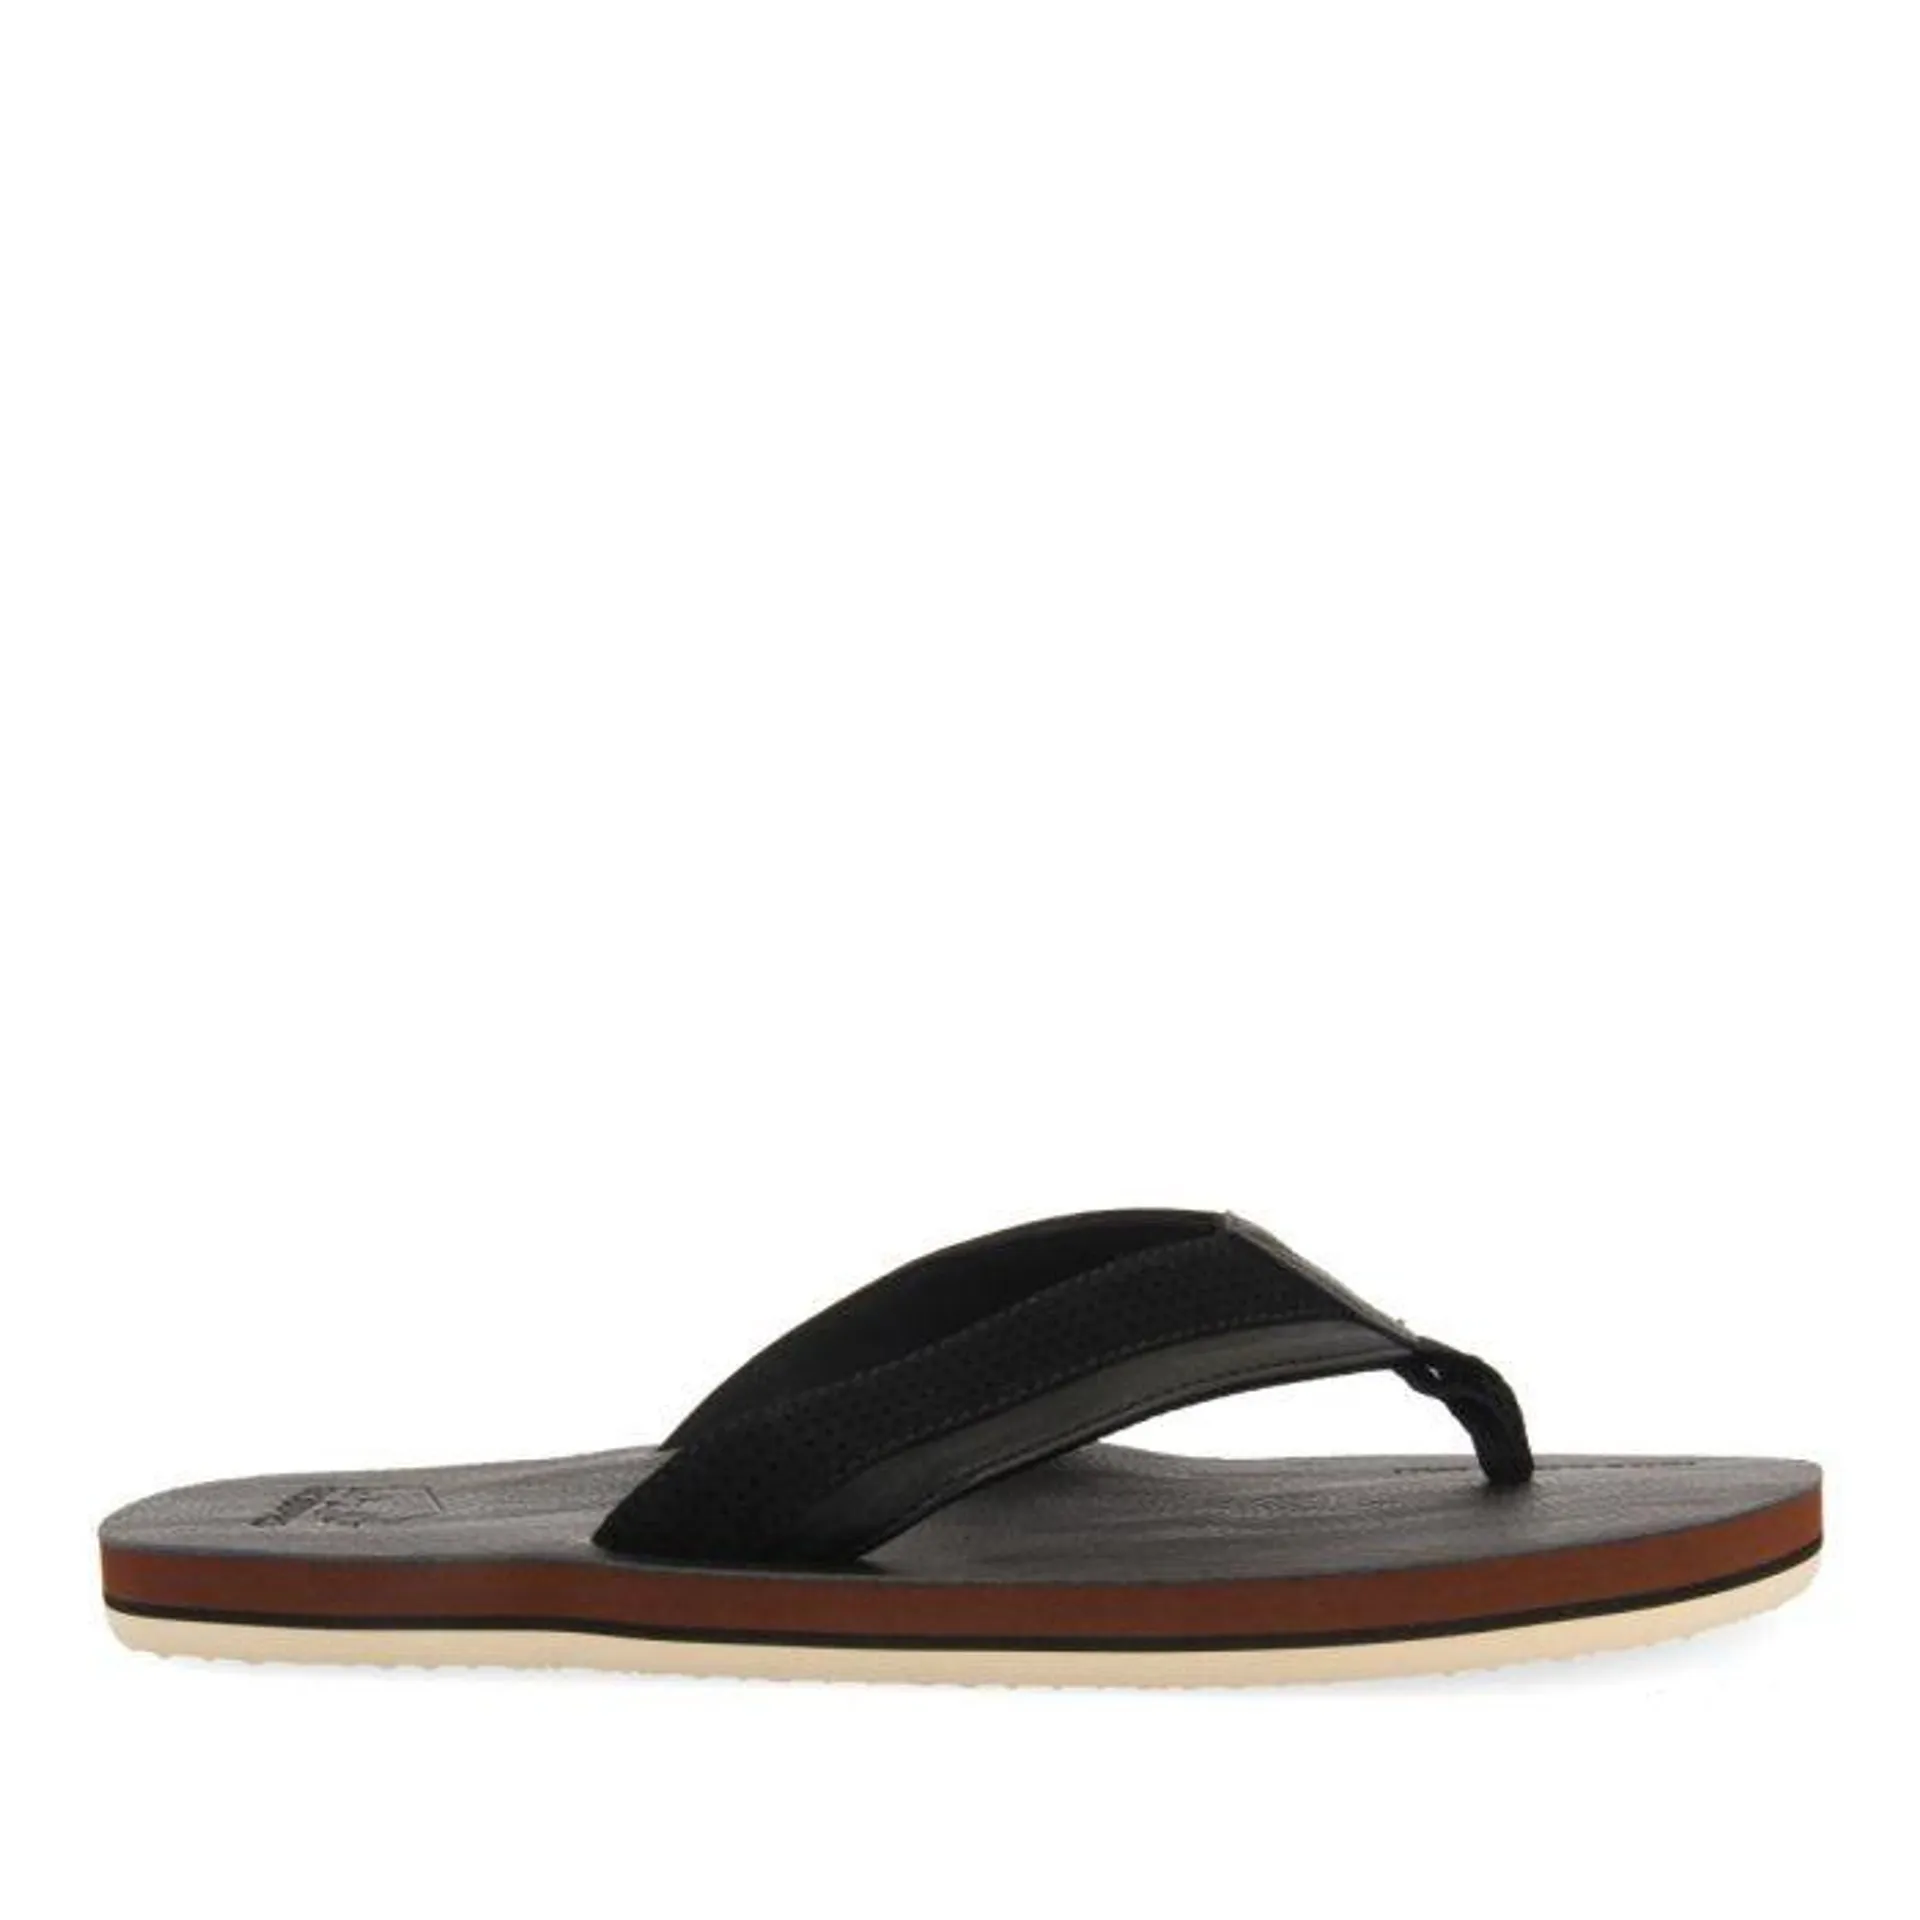 BLACK FLIP-FLOPS WITH TWO-TONE CUT FOR MEN BRENT